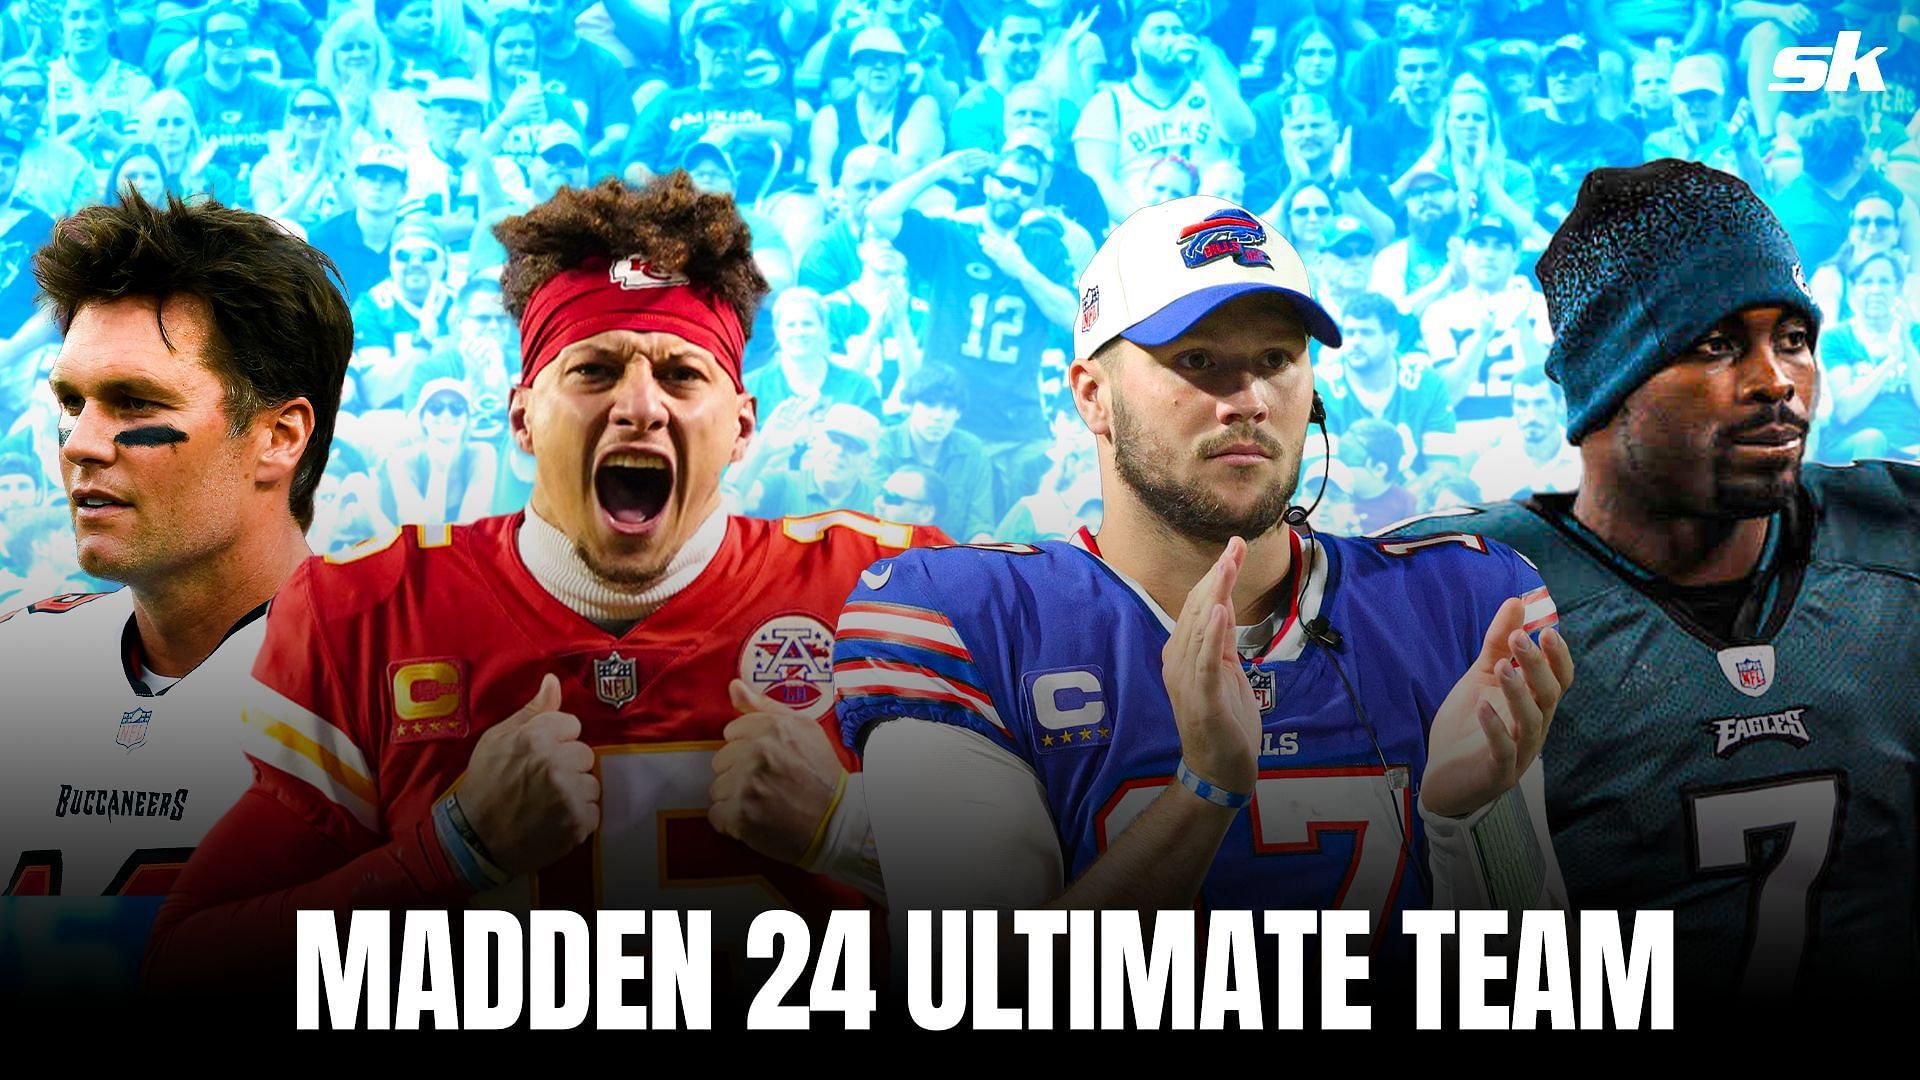 A professional gamer criticized the lack of variation for Madden 24